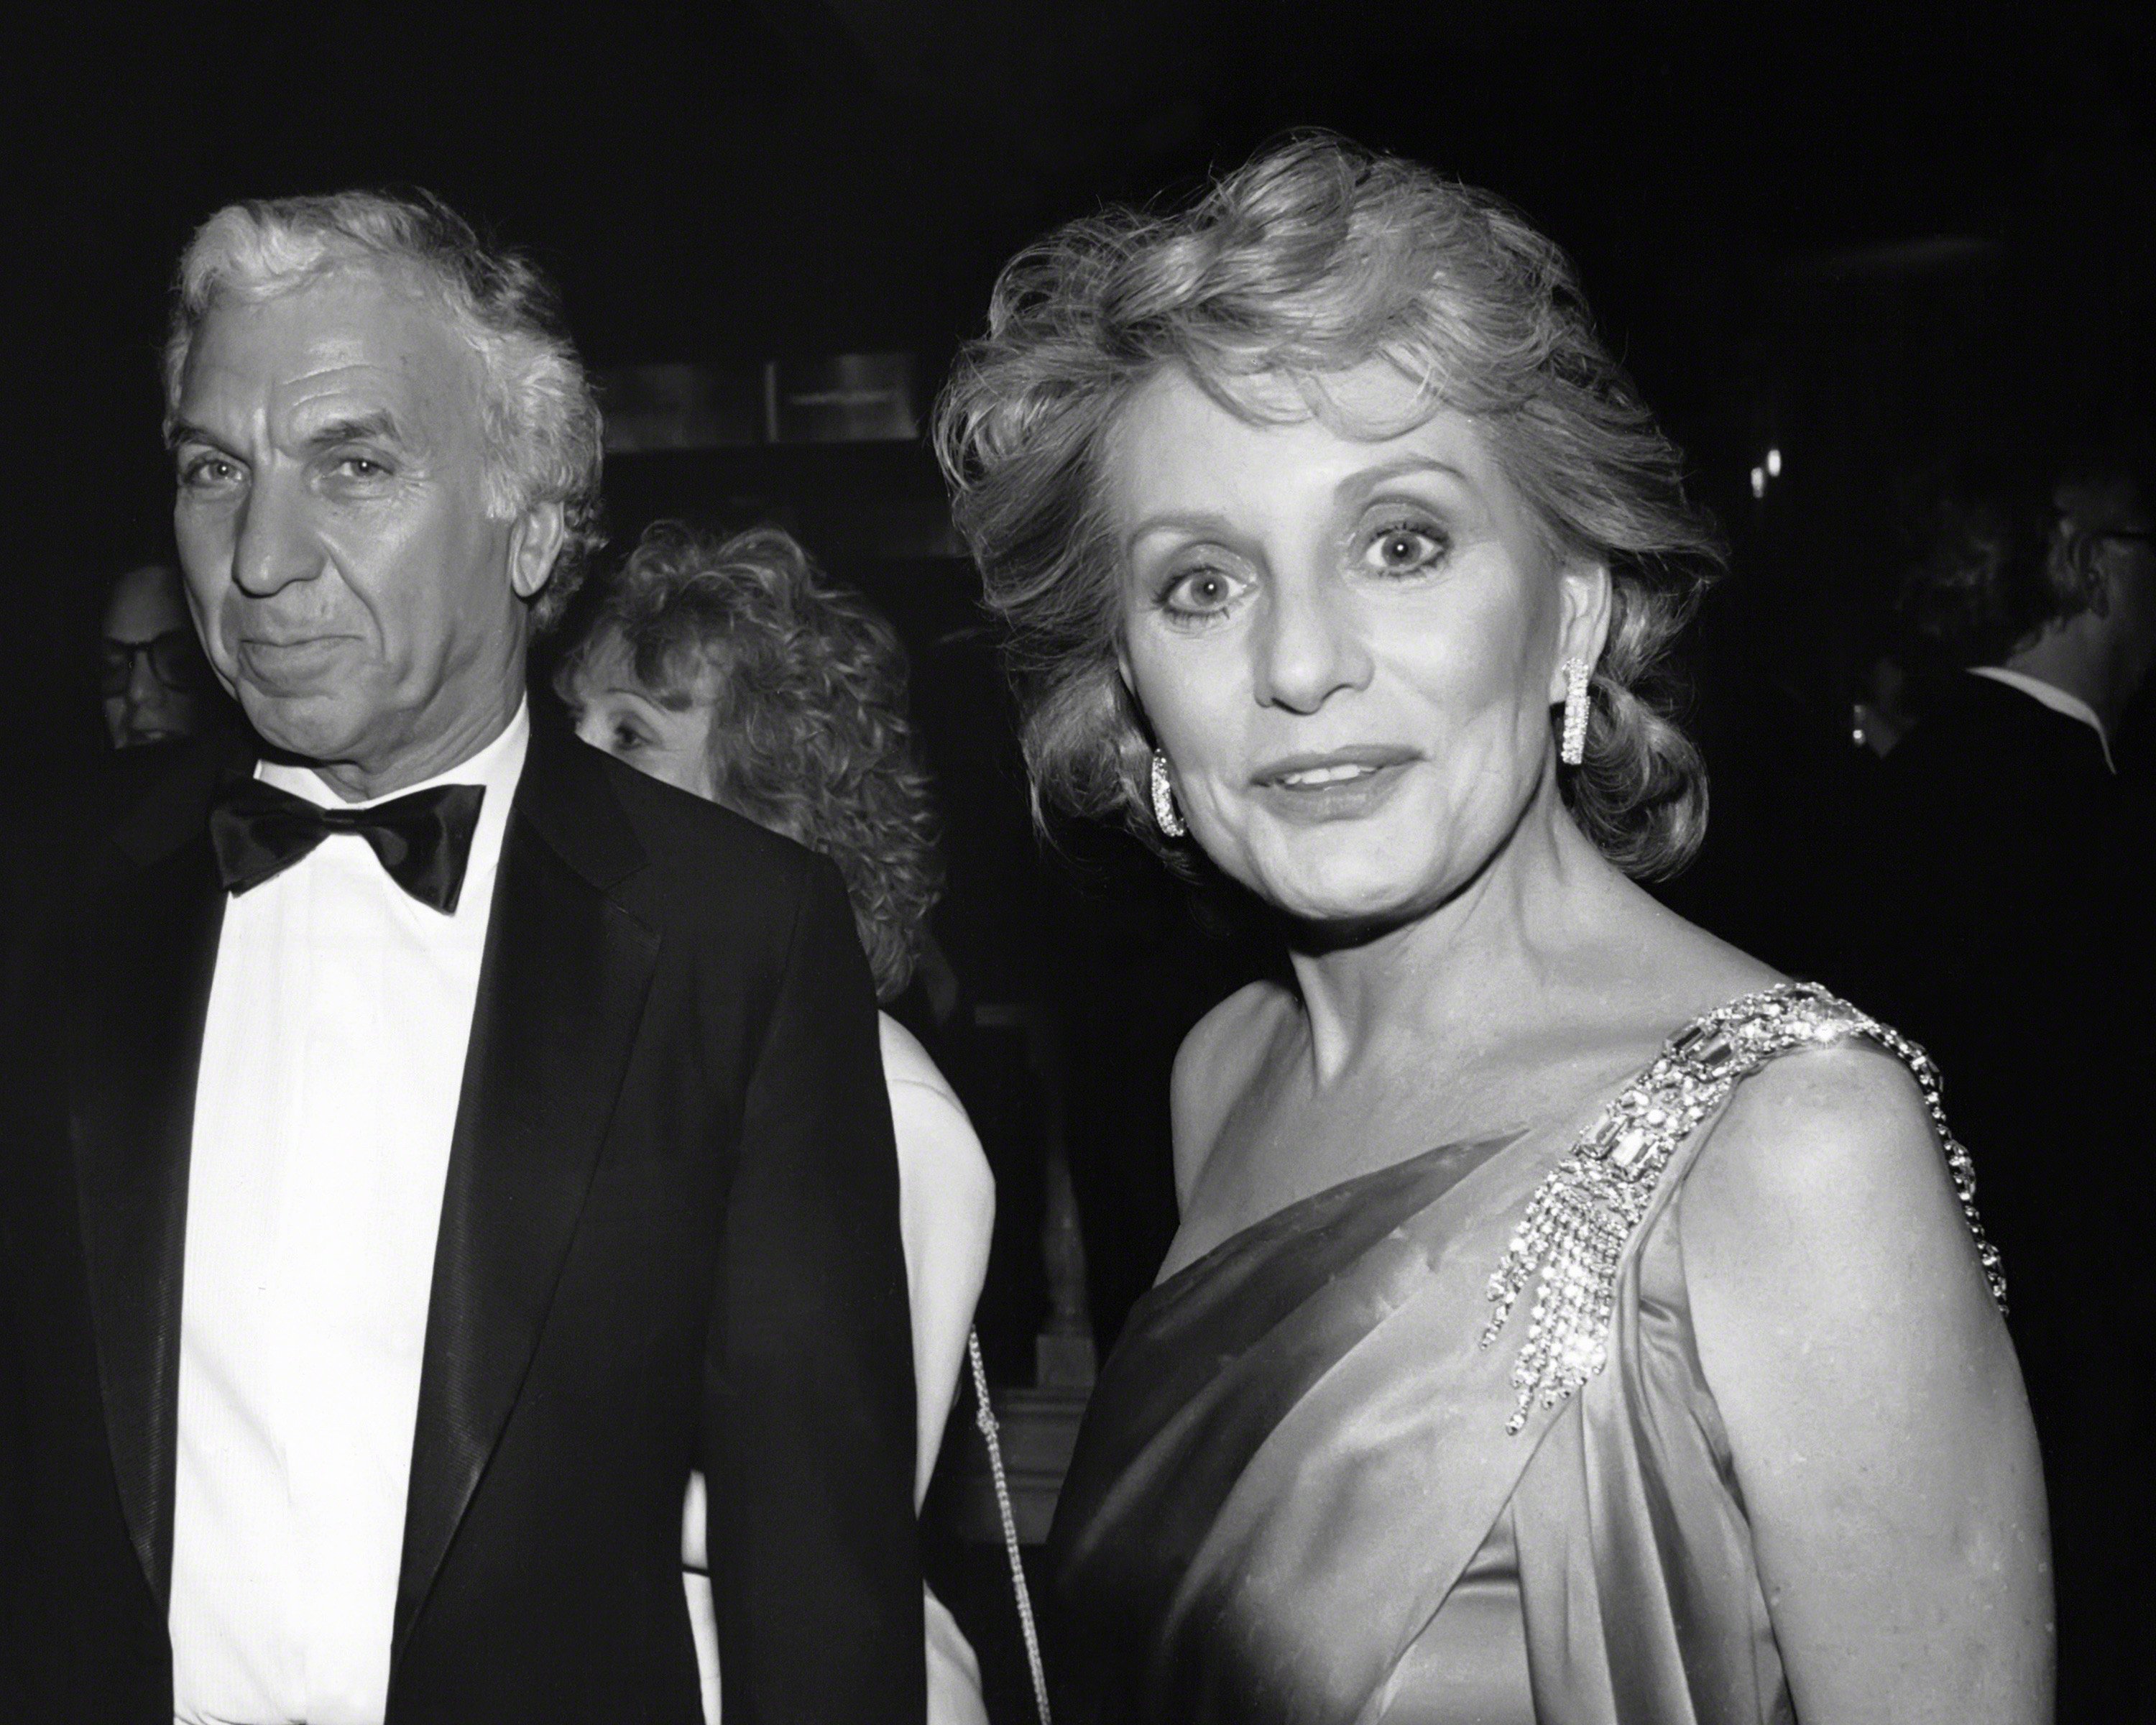 Barbara Walters and Merv Adelson circa 1985 in New York City. | Source: Getty Images